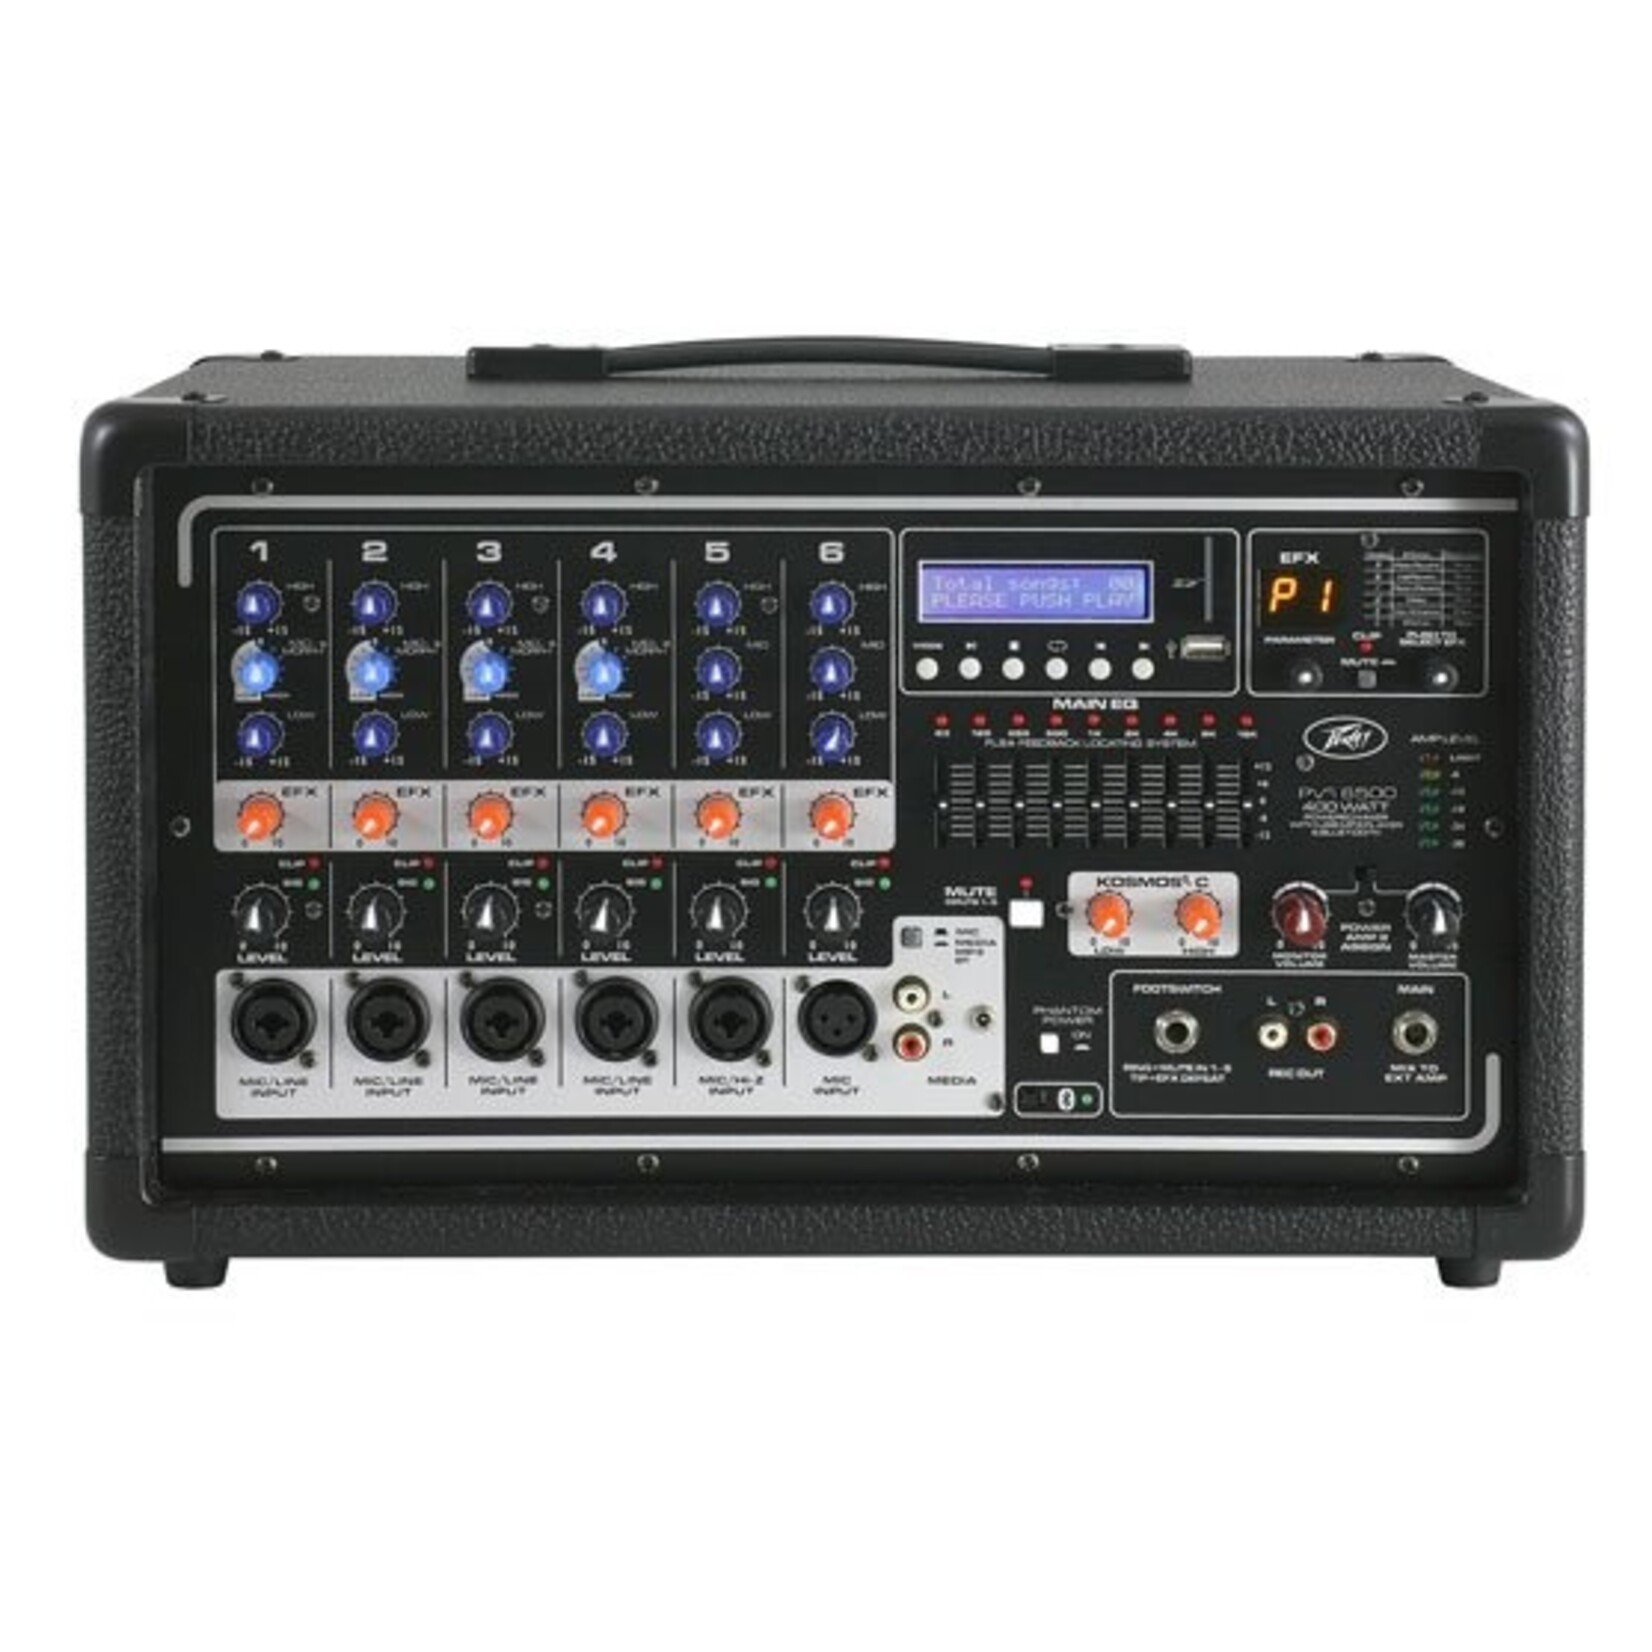 Peavey PVi 6500 Powered Mixer with BlueTooth